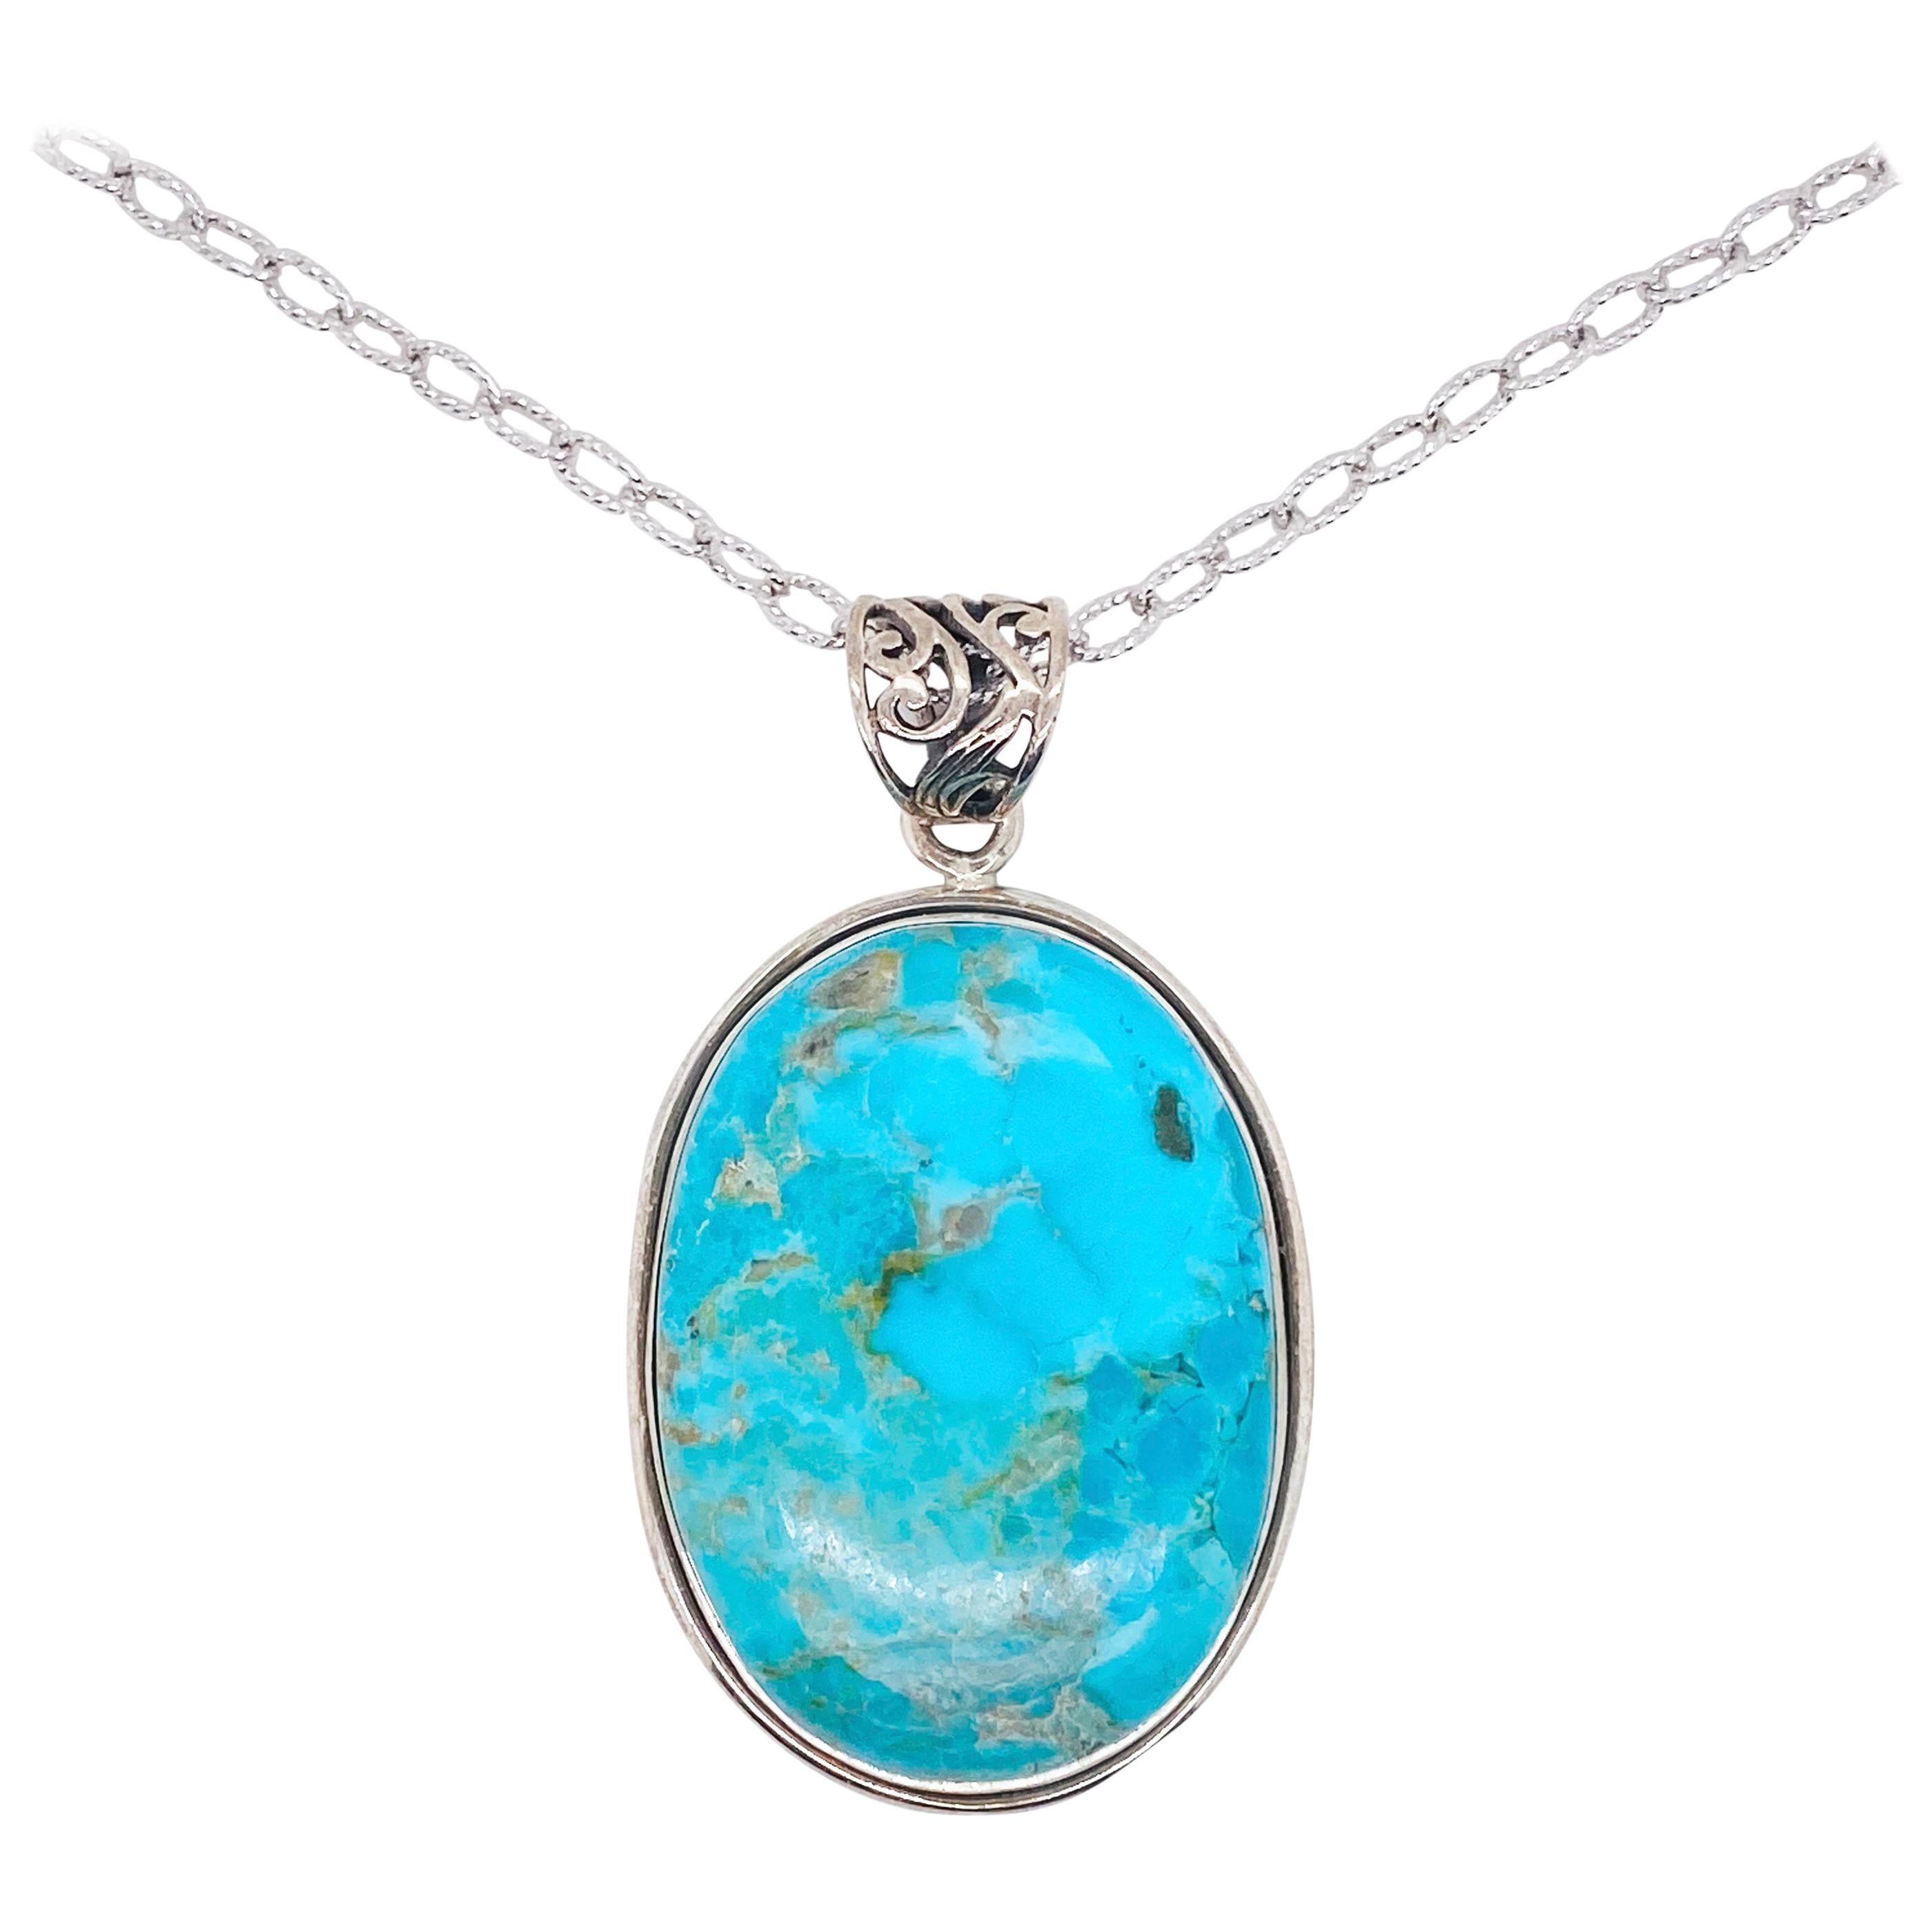 Organic Turquoise Pendant in Sterling Silver w Handmade Bezel w Oval Cable Chain